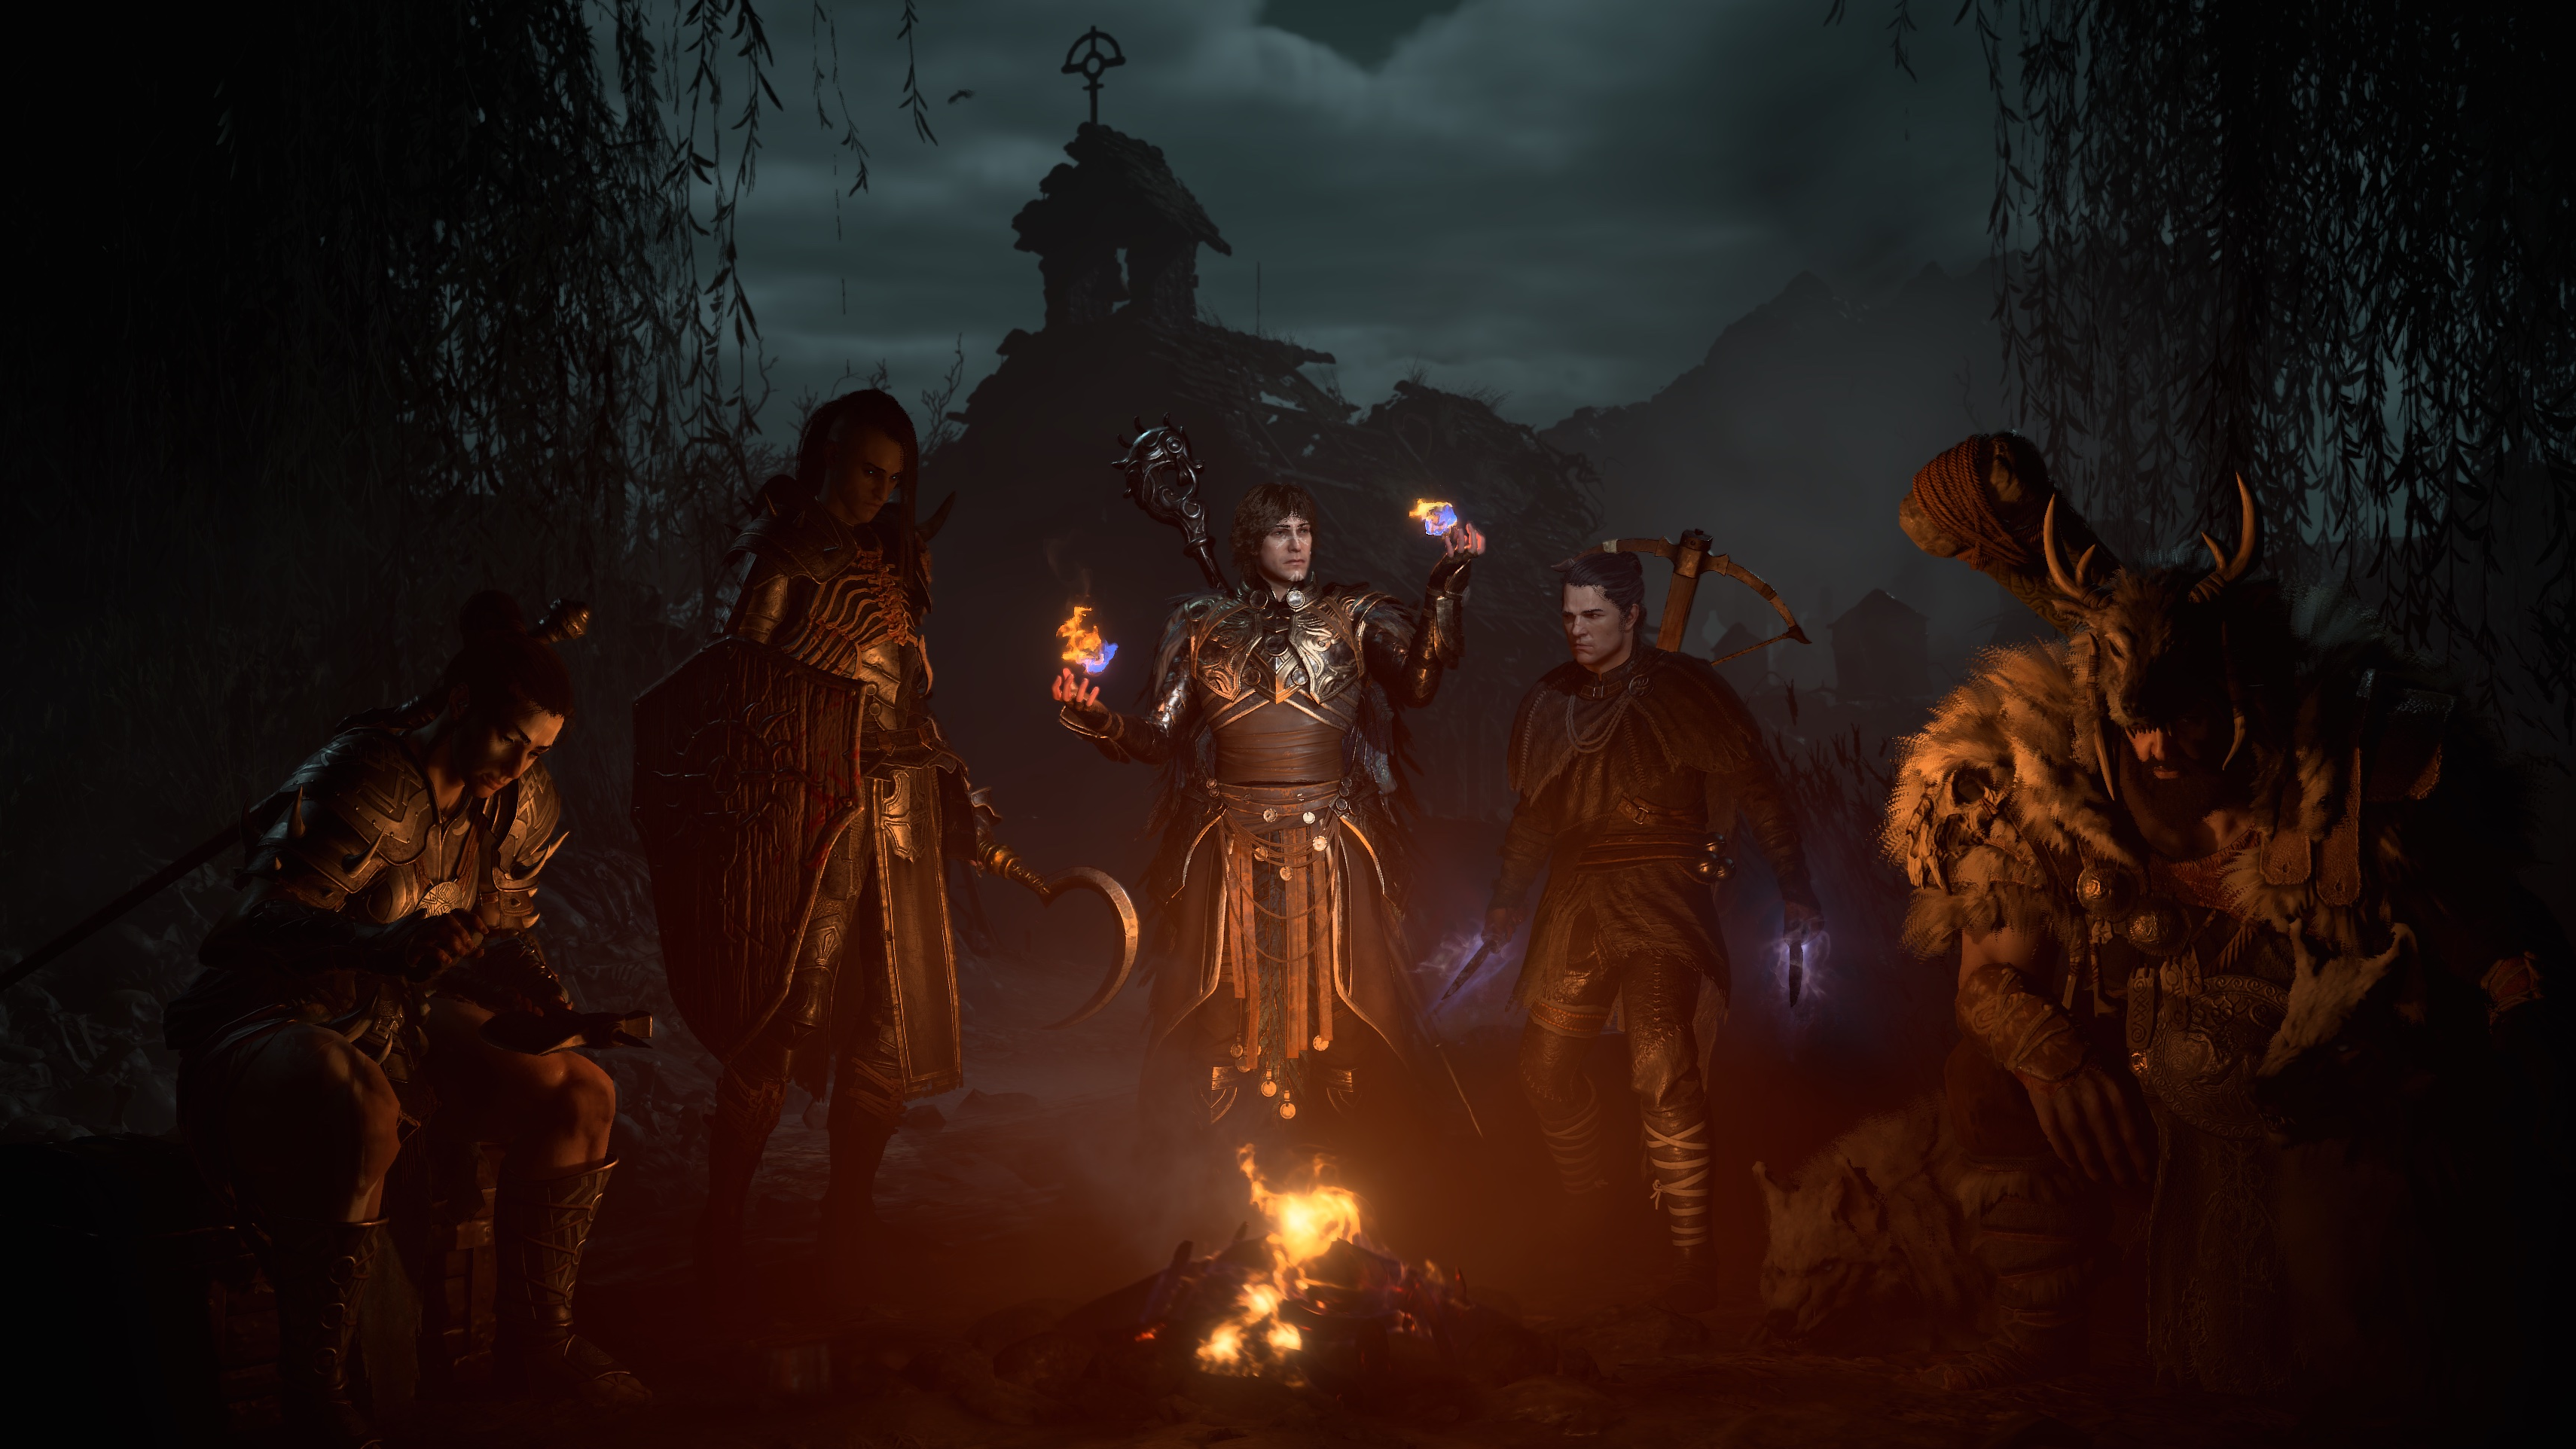 Character creator in Diablo 4 / IV. All of the characters, barbarian, necromancer, sorcerer, rogue, and druid, sat in front of a campfire at night.